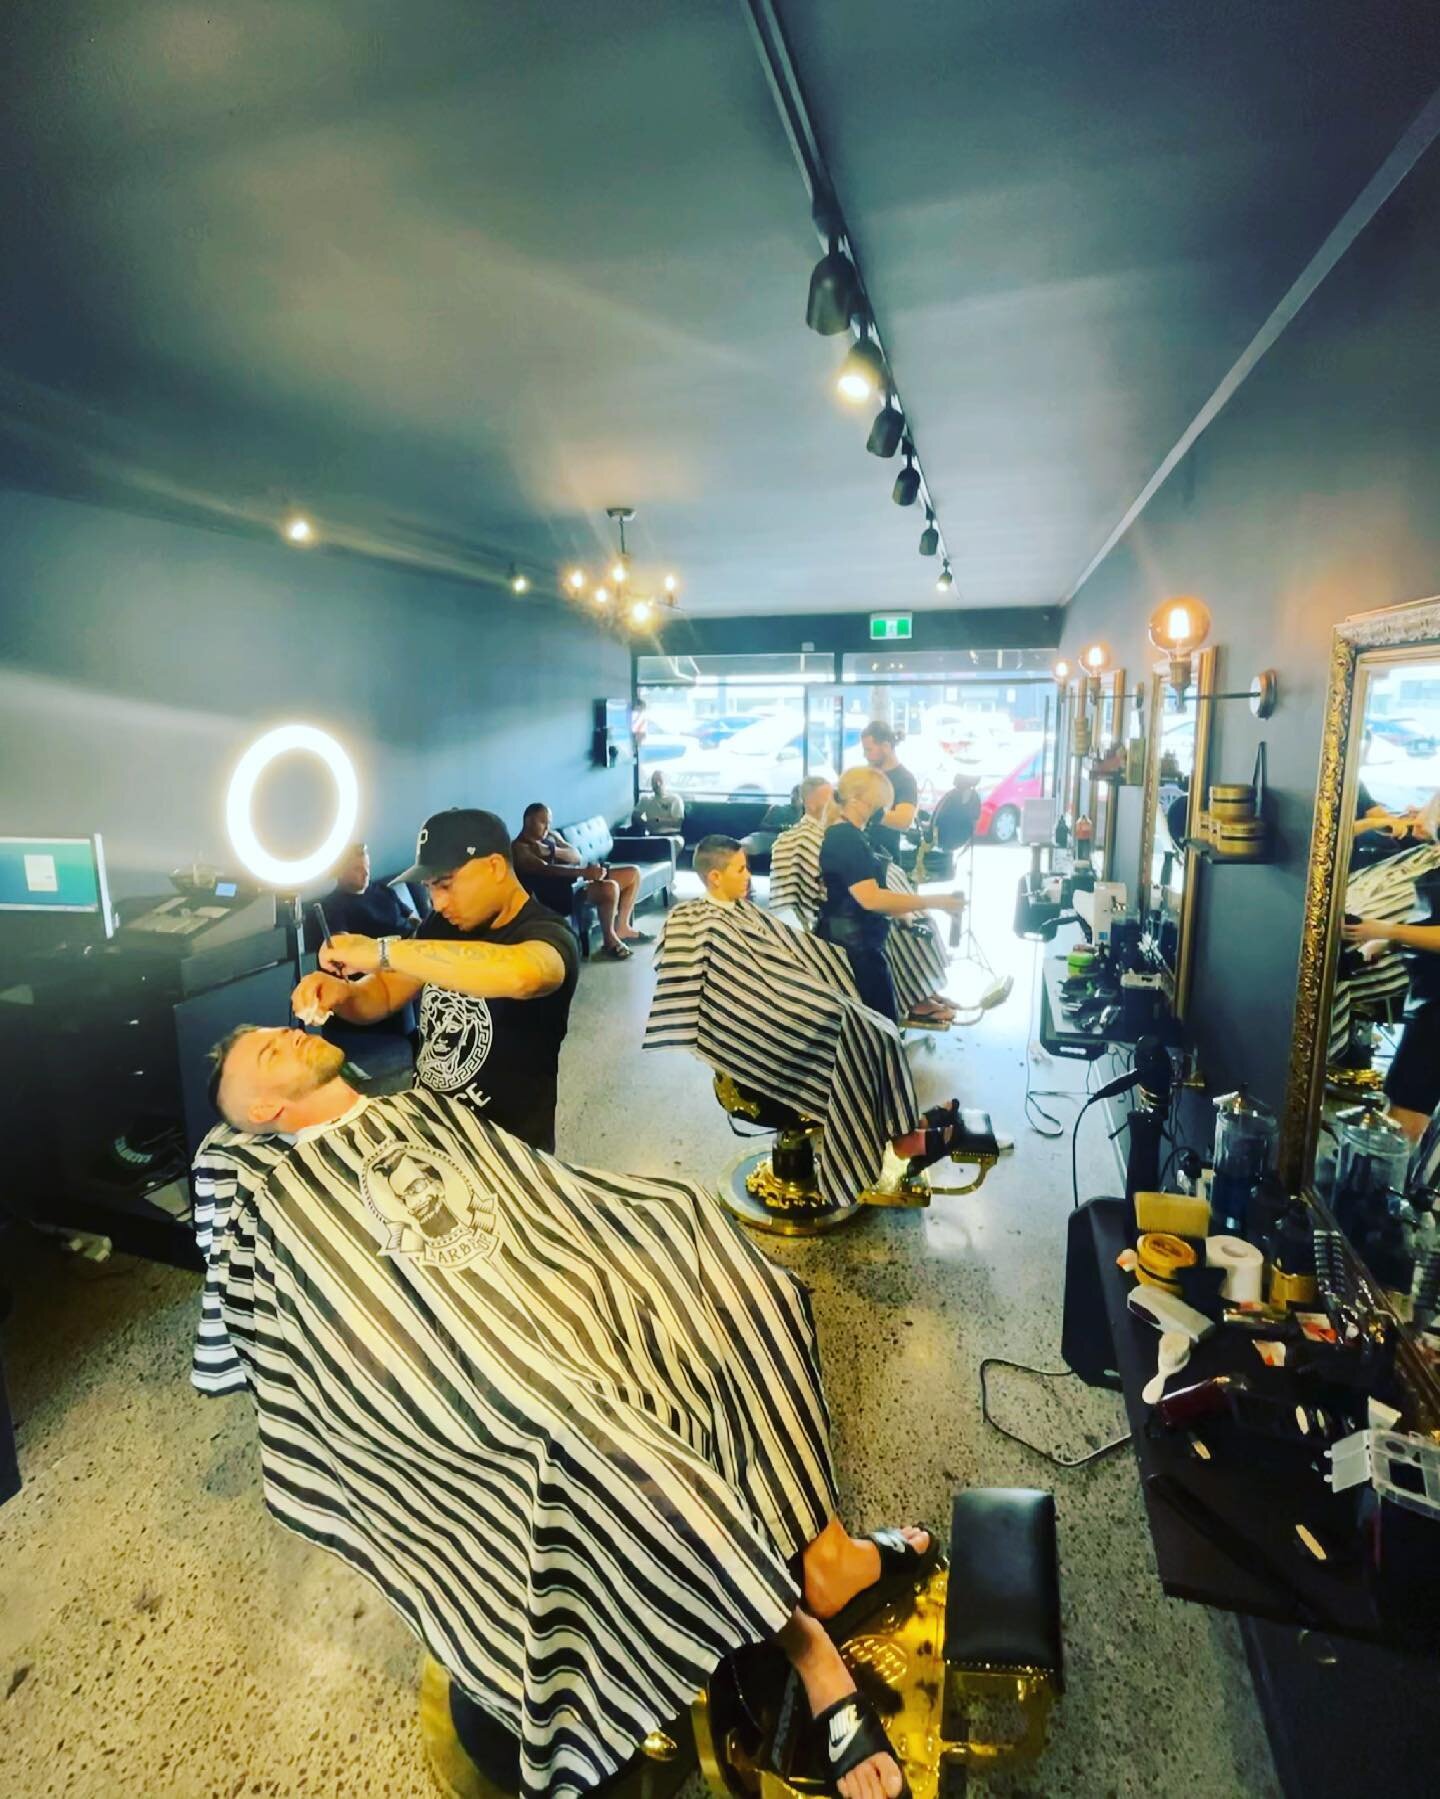 About this morning! Closing today 6pm!

#saturday
#barber
#barbershop